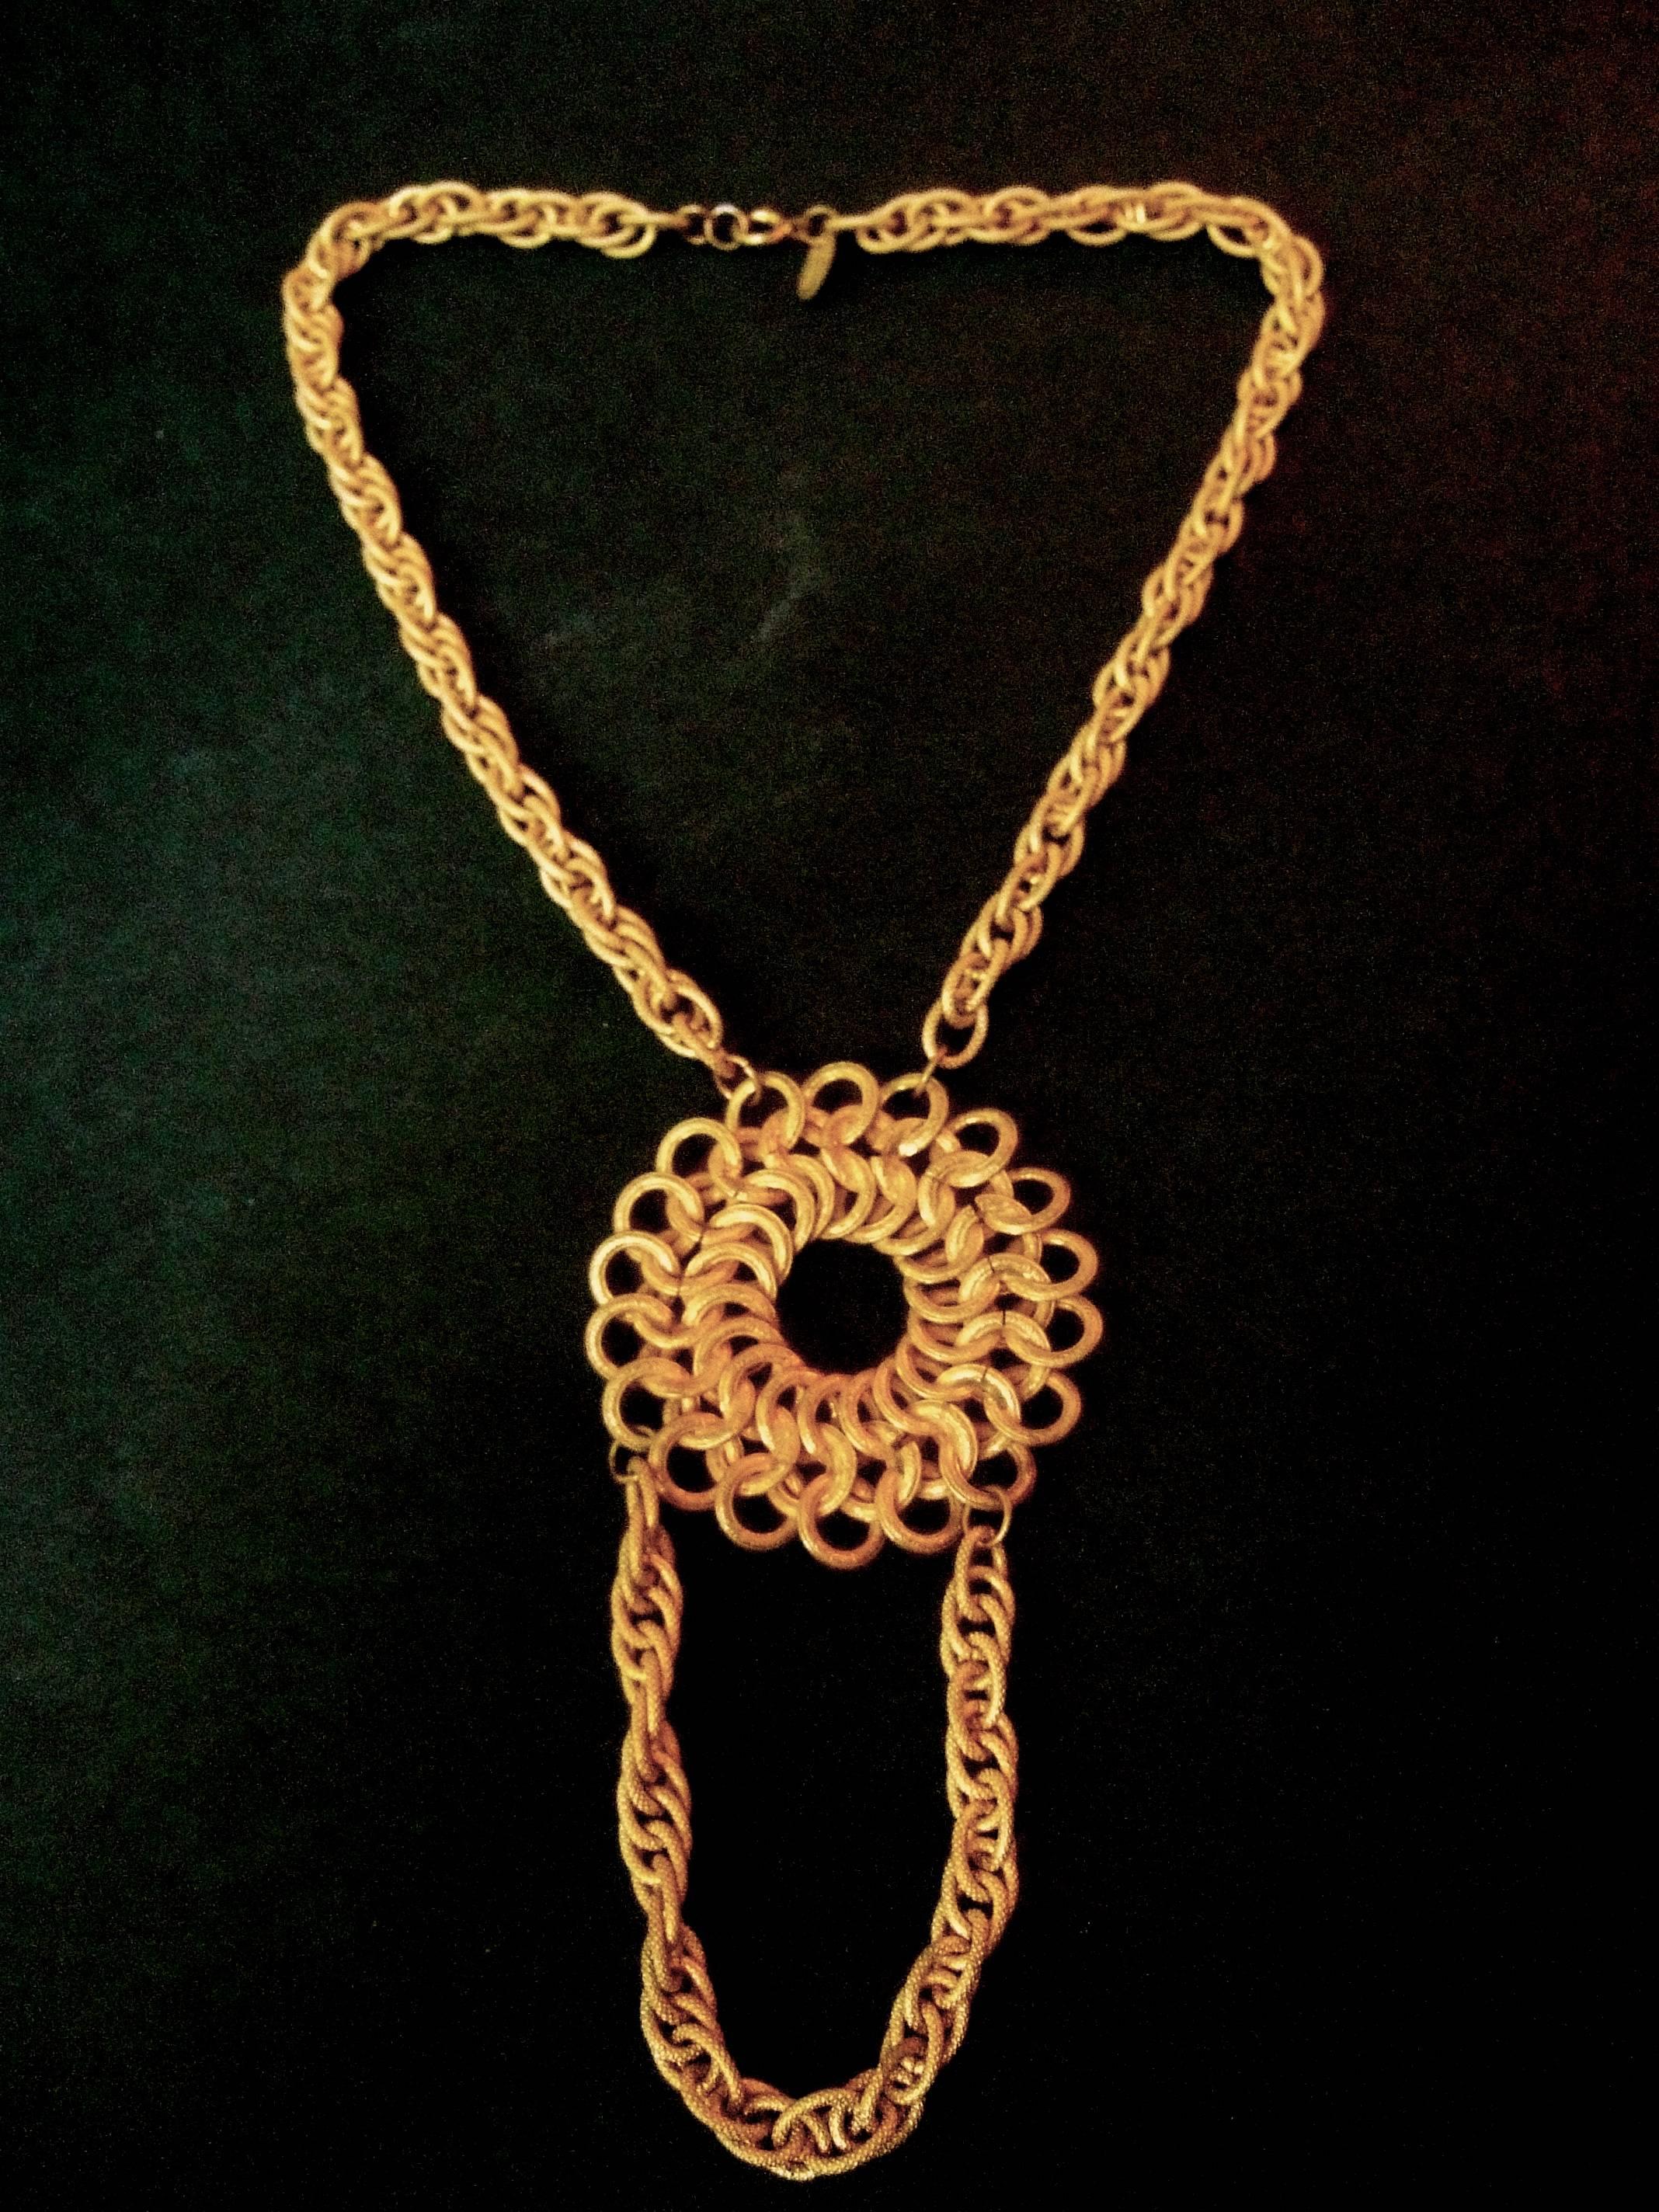 Women's Miriam Haskell Russian Gilt Metal Pendant Necklace c 1970 For Sale